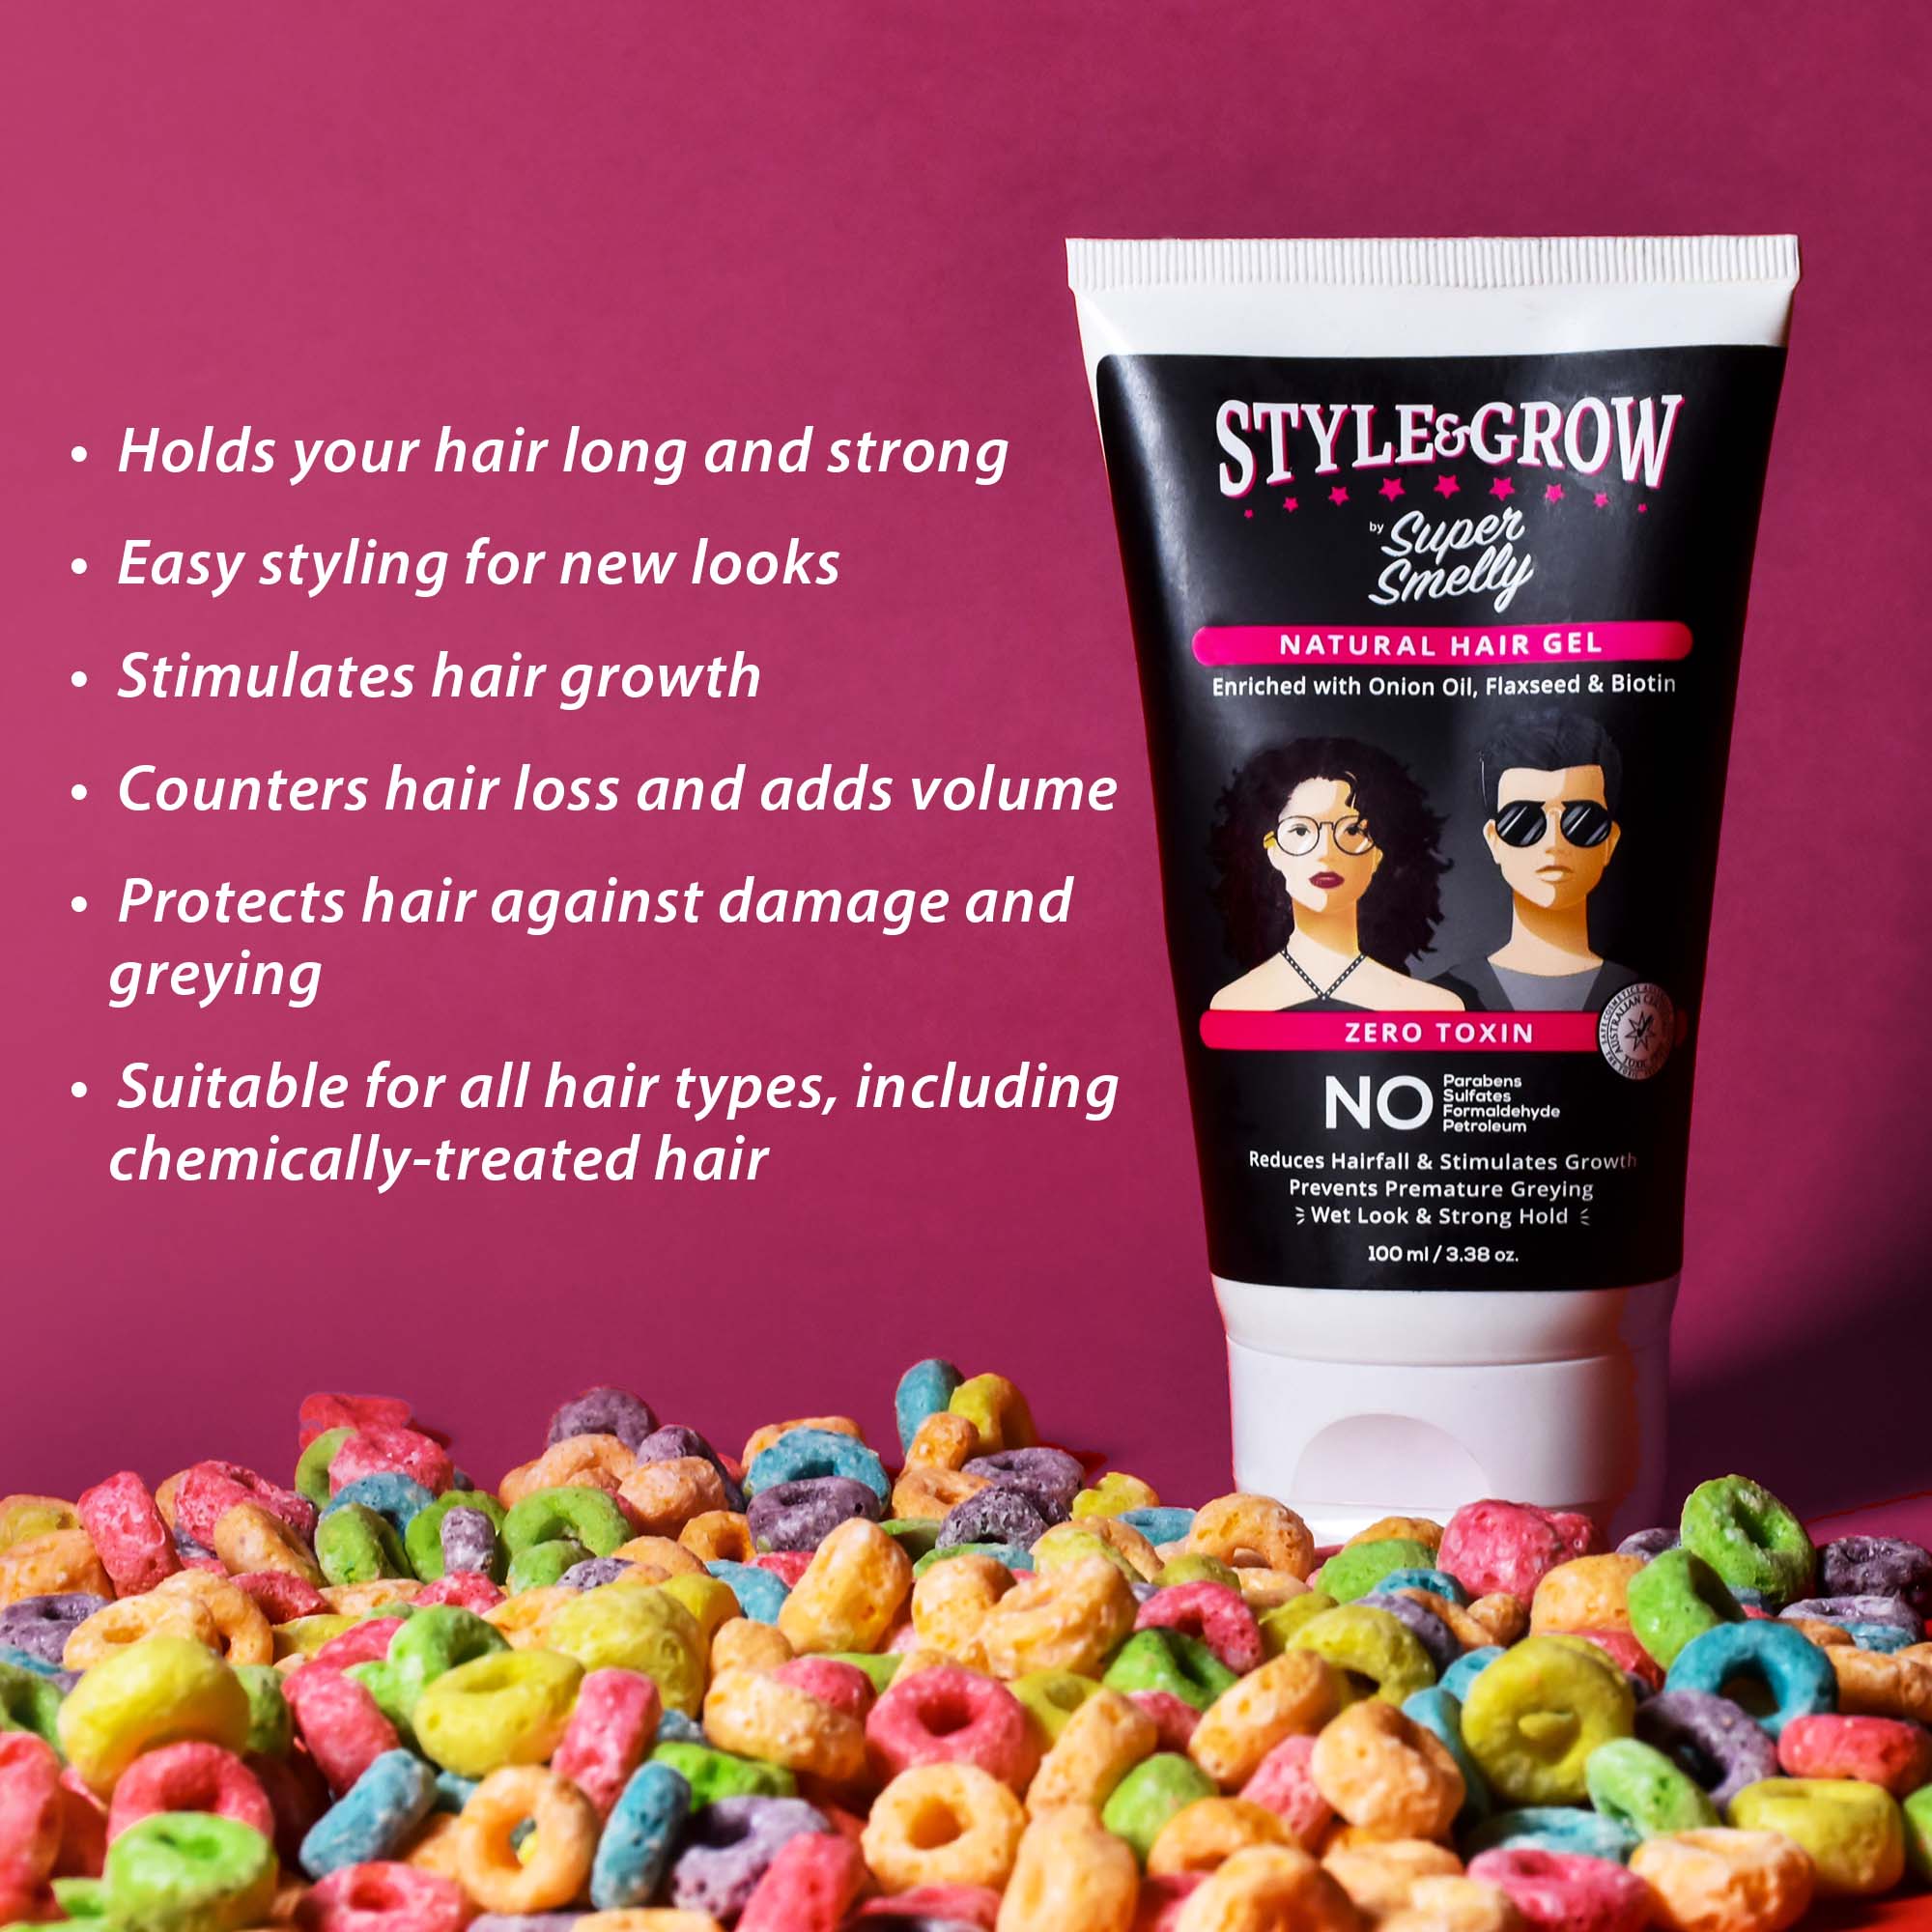 Onion Hair Gel | Style & Regrow Hair With Super Smelly Gel Shop Online